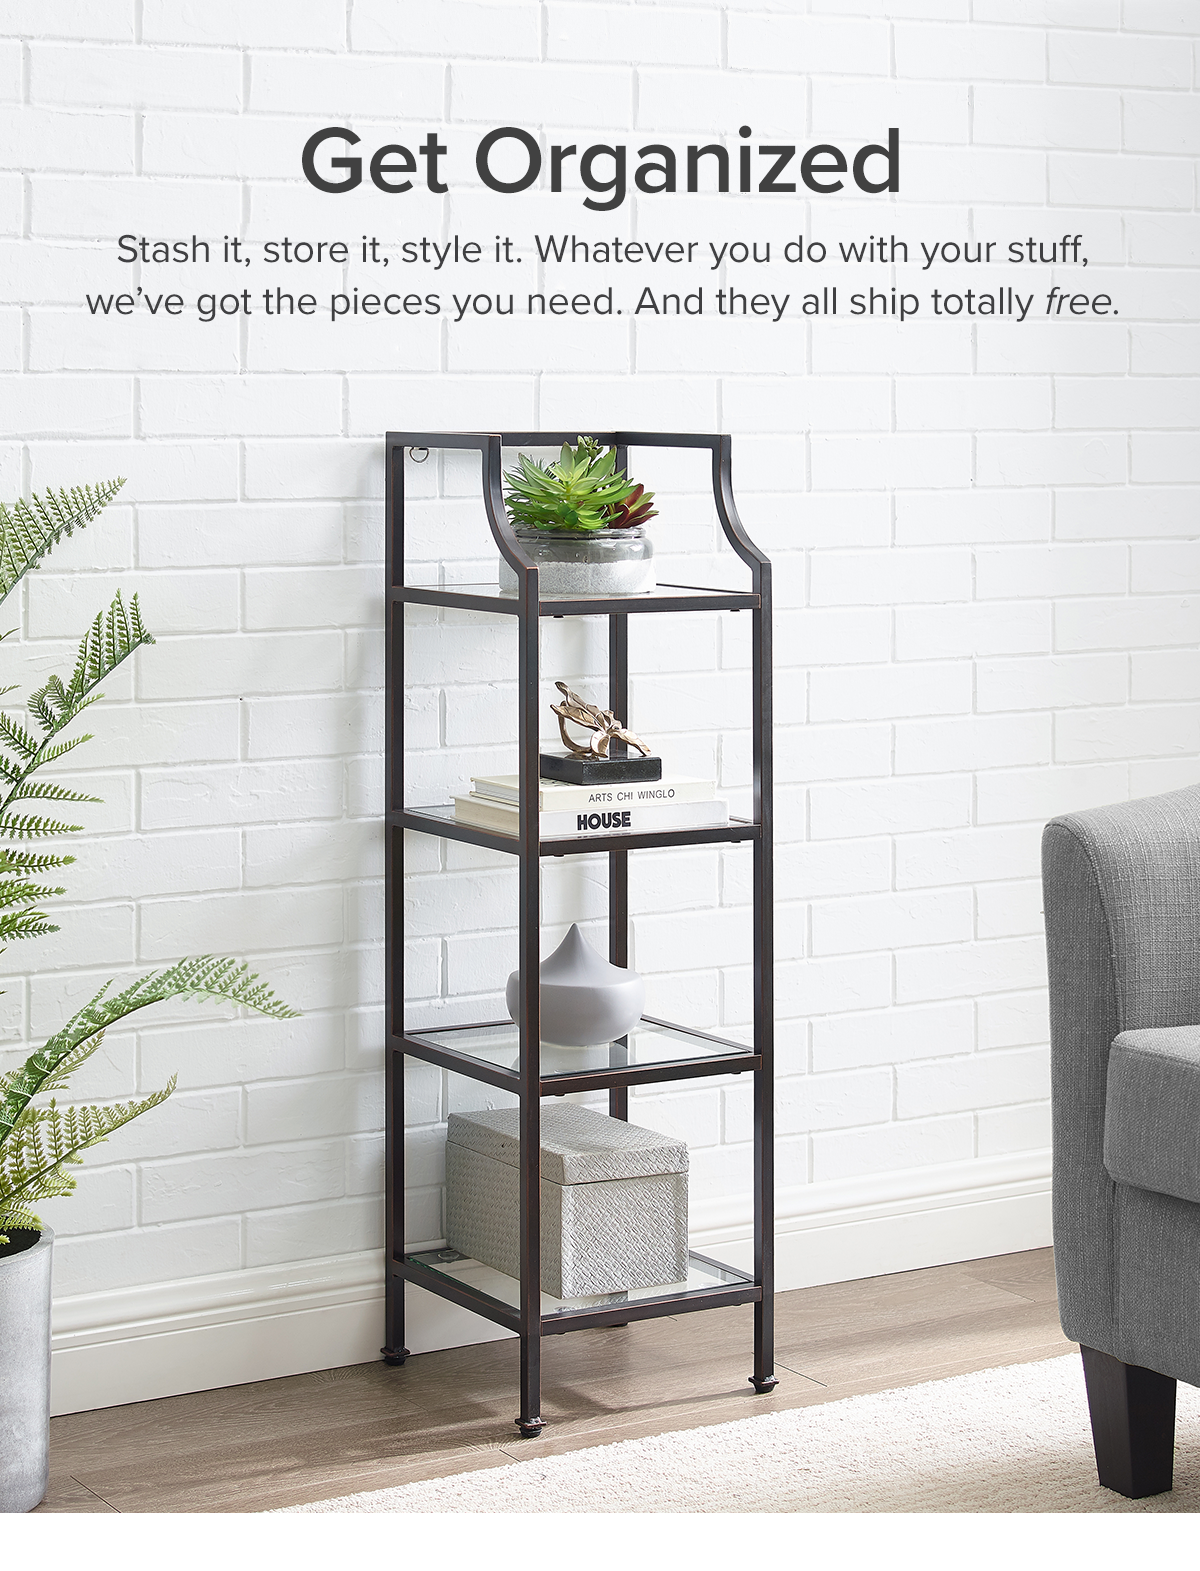 Get Organized | Stash it, store it, style it. Whatever you do with your stuff, we've got the pieces you need.